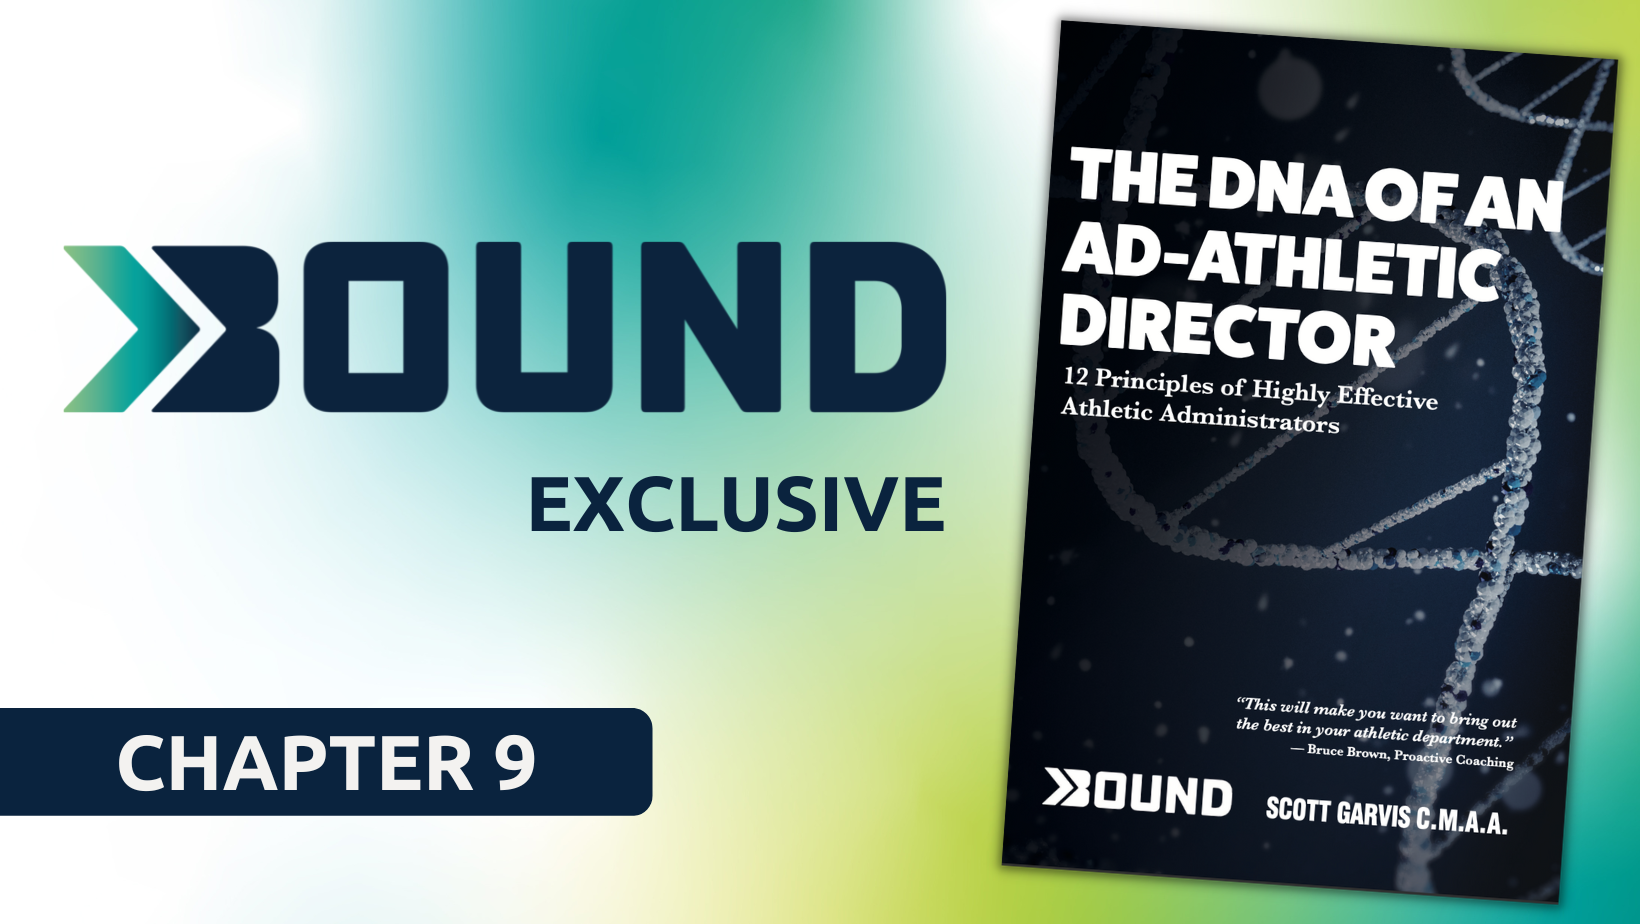 Bound™ Exclusive: The DNA of an AD (Chapter 9)